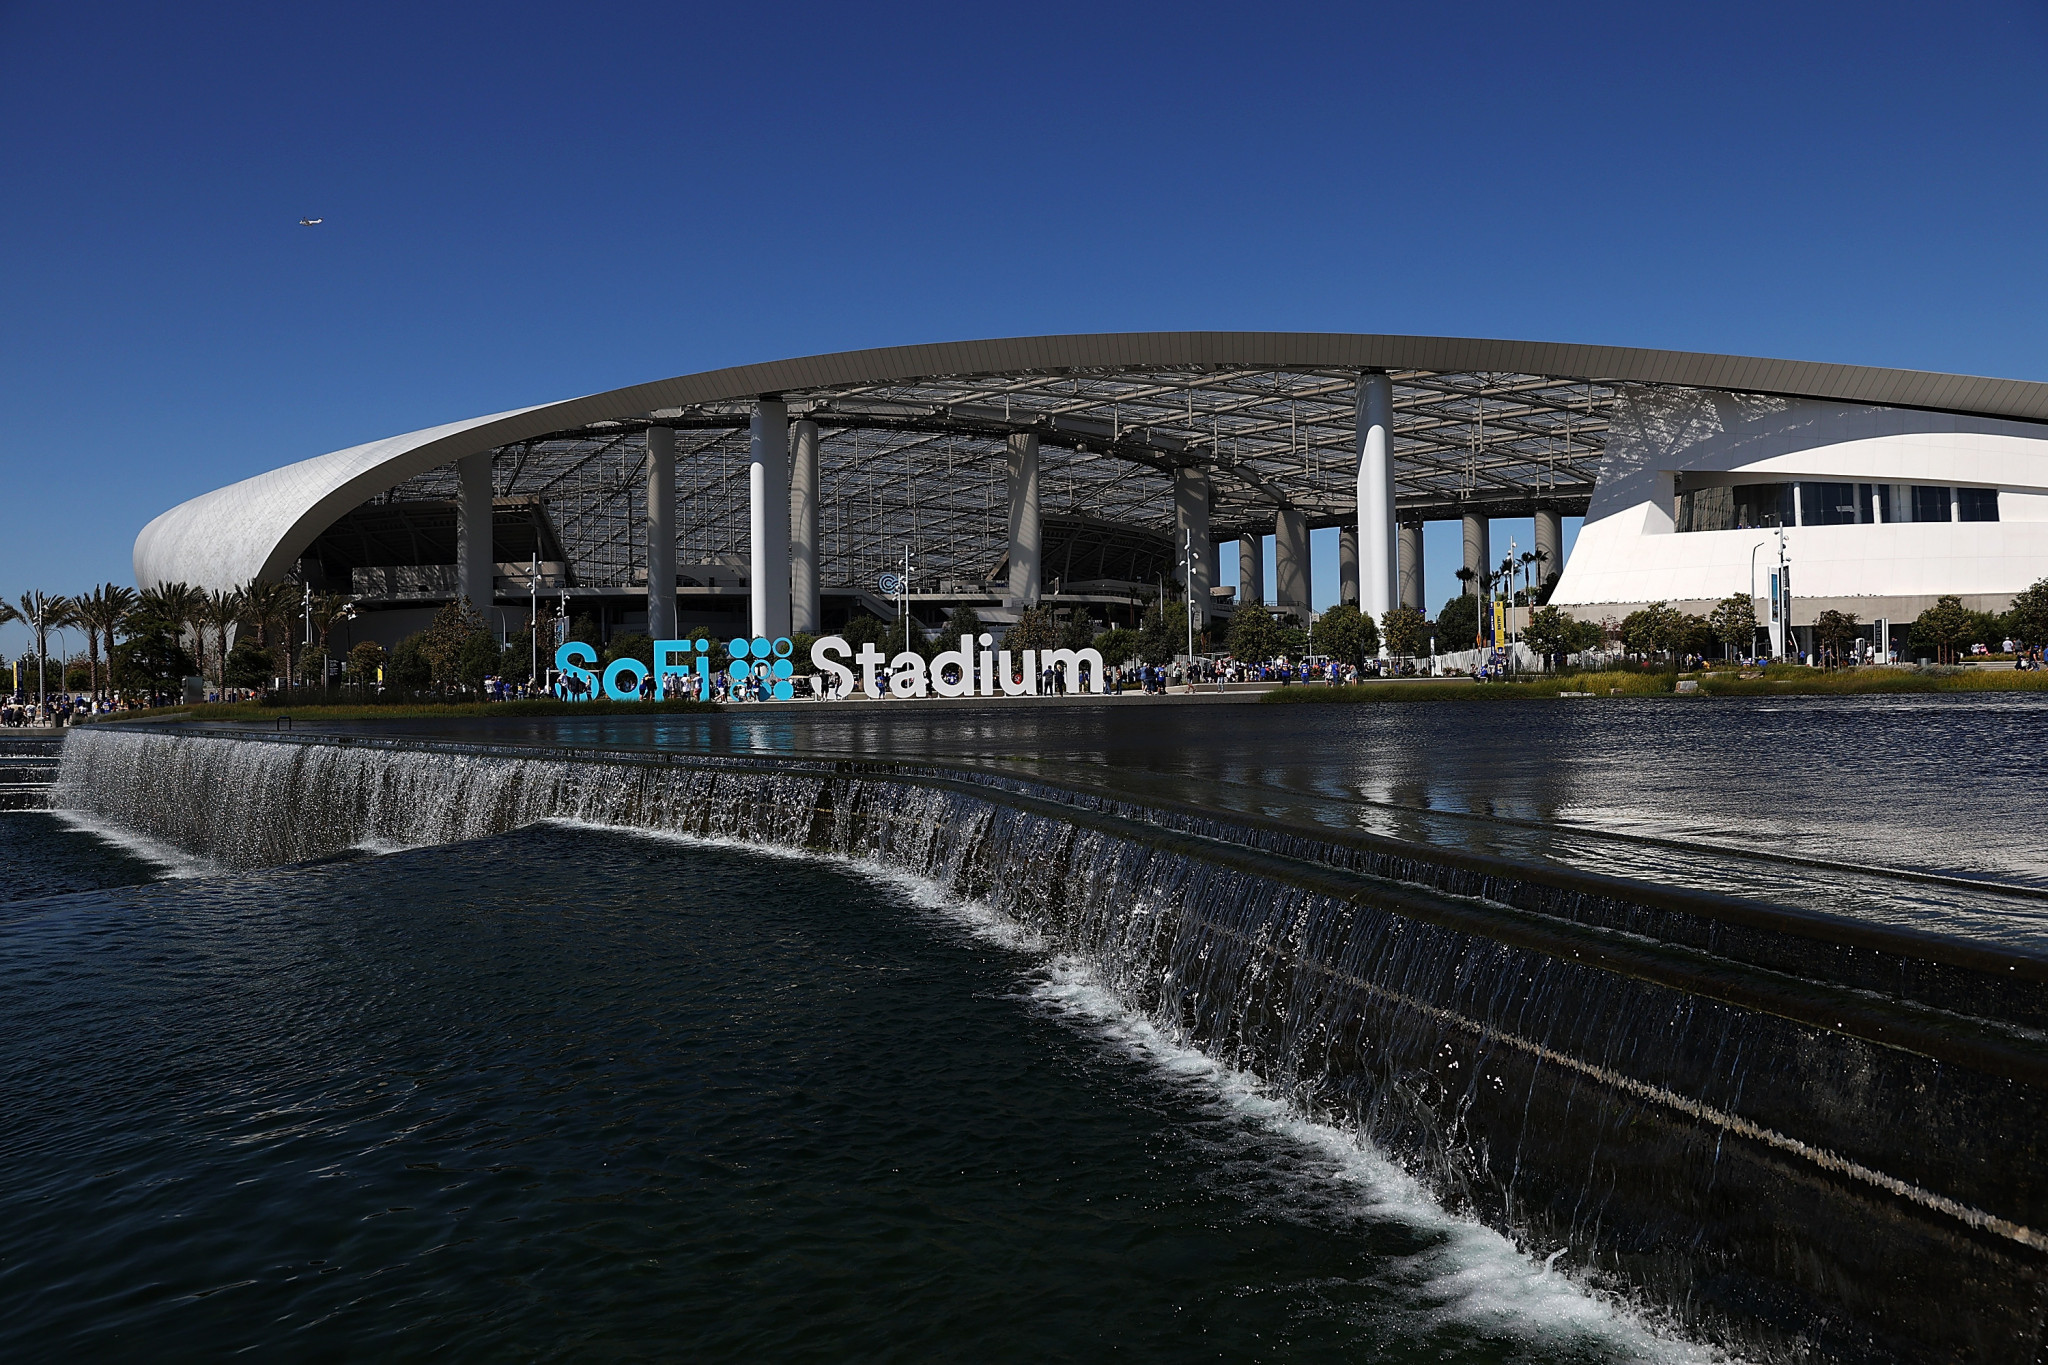 SoFi Stadium partners with Clear for "expedited lane" prior to Los Angeles 2028